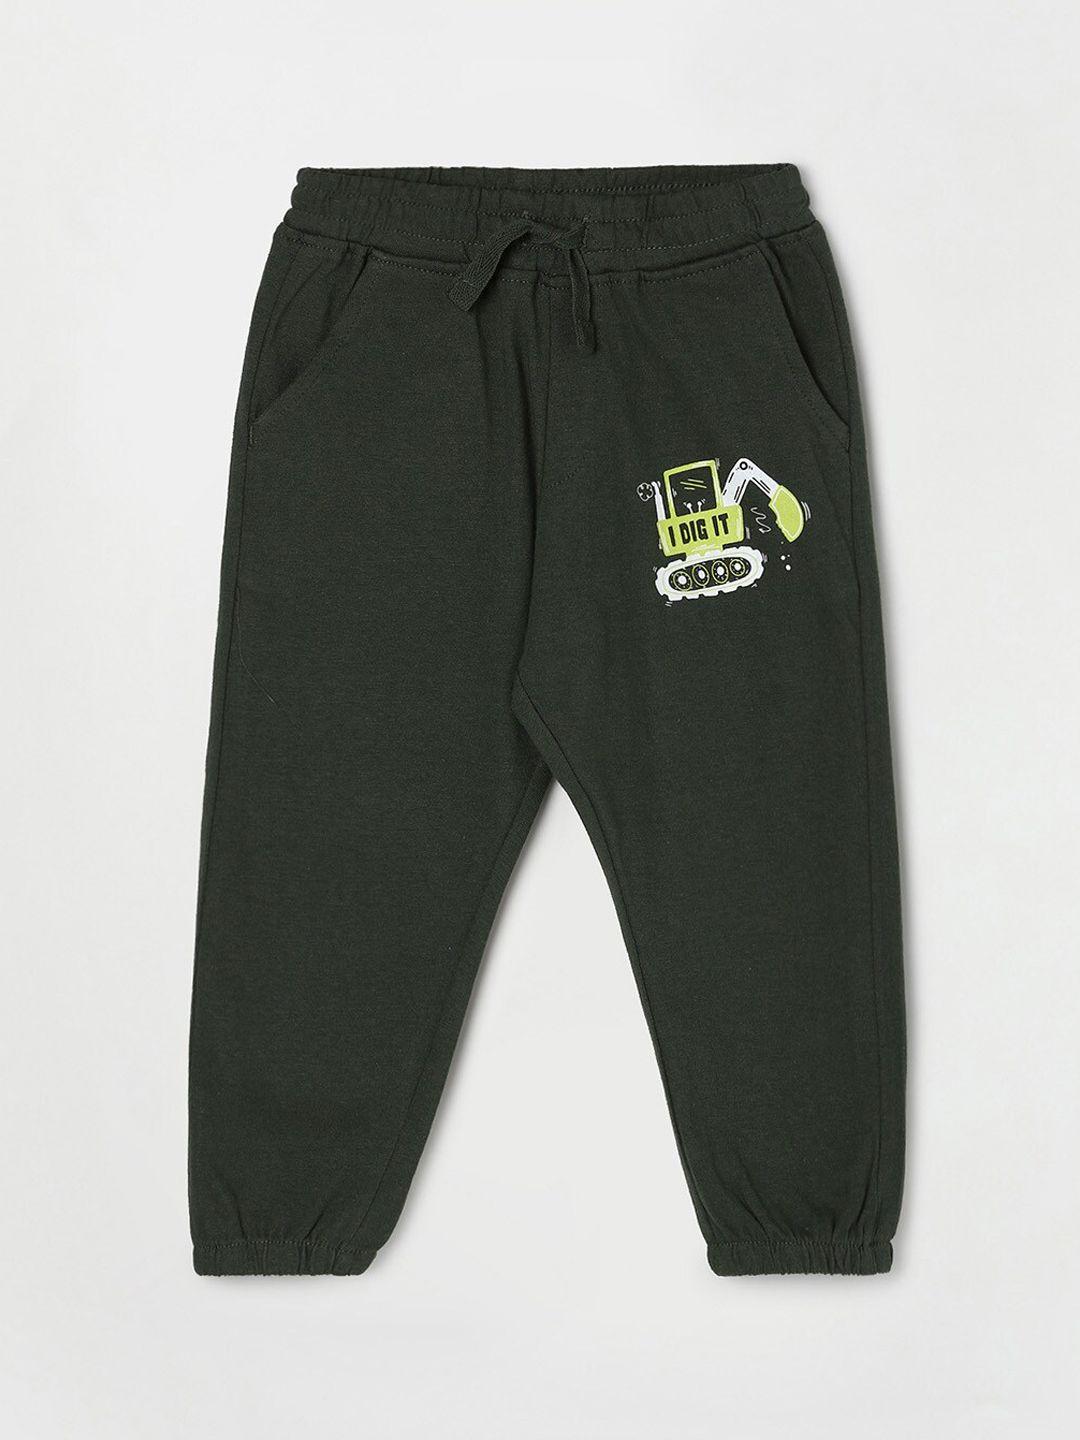 juniors-by-lifestyle-boys-printed-cotton-joggers